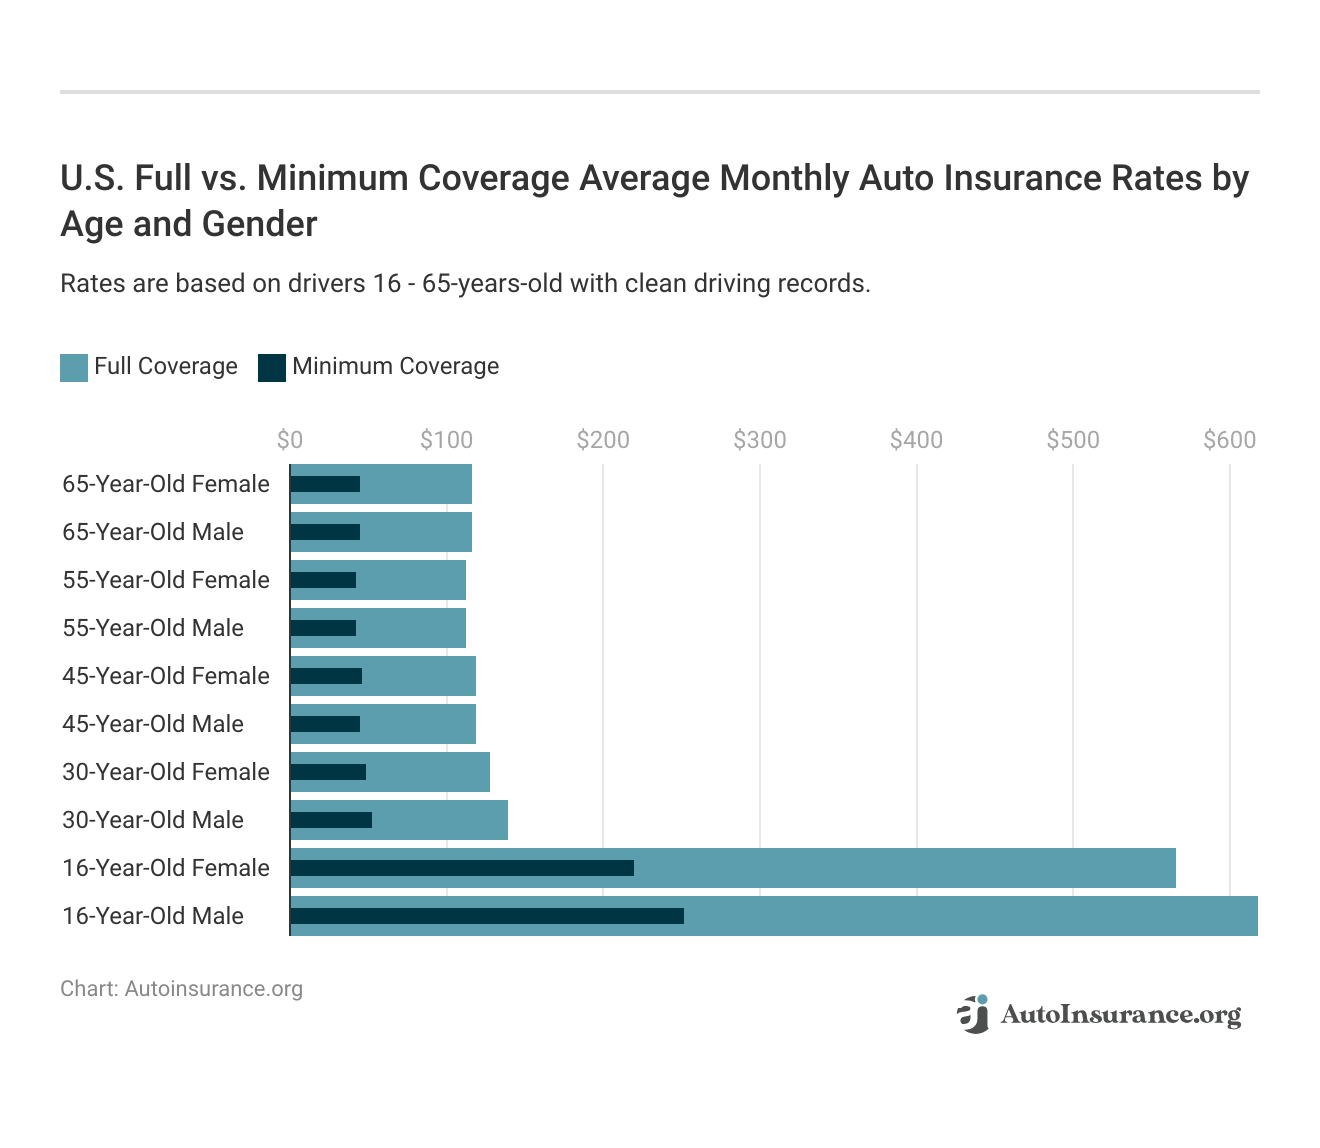 <h3>U.S. Full vs. Minimum Coverage Average Monthly Auto Insurance Rates by Age and Gender</h3>